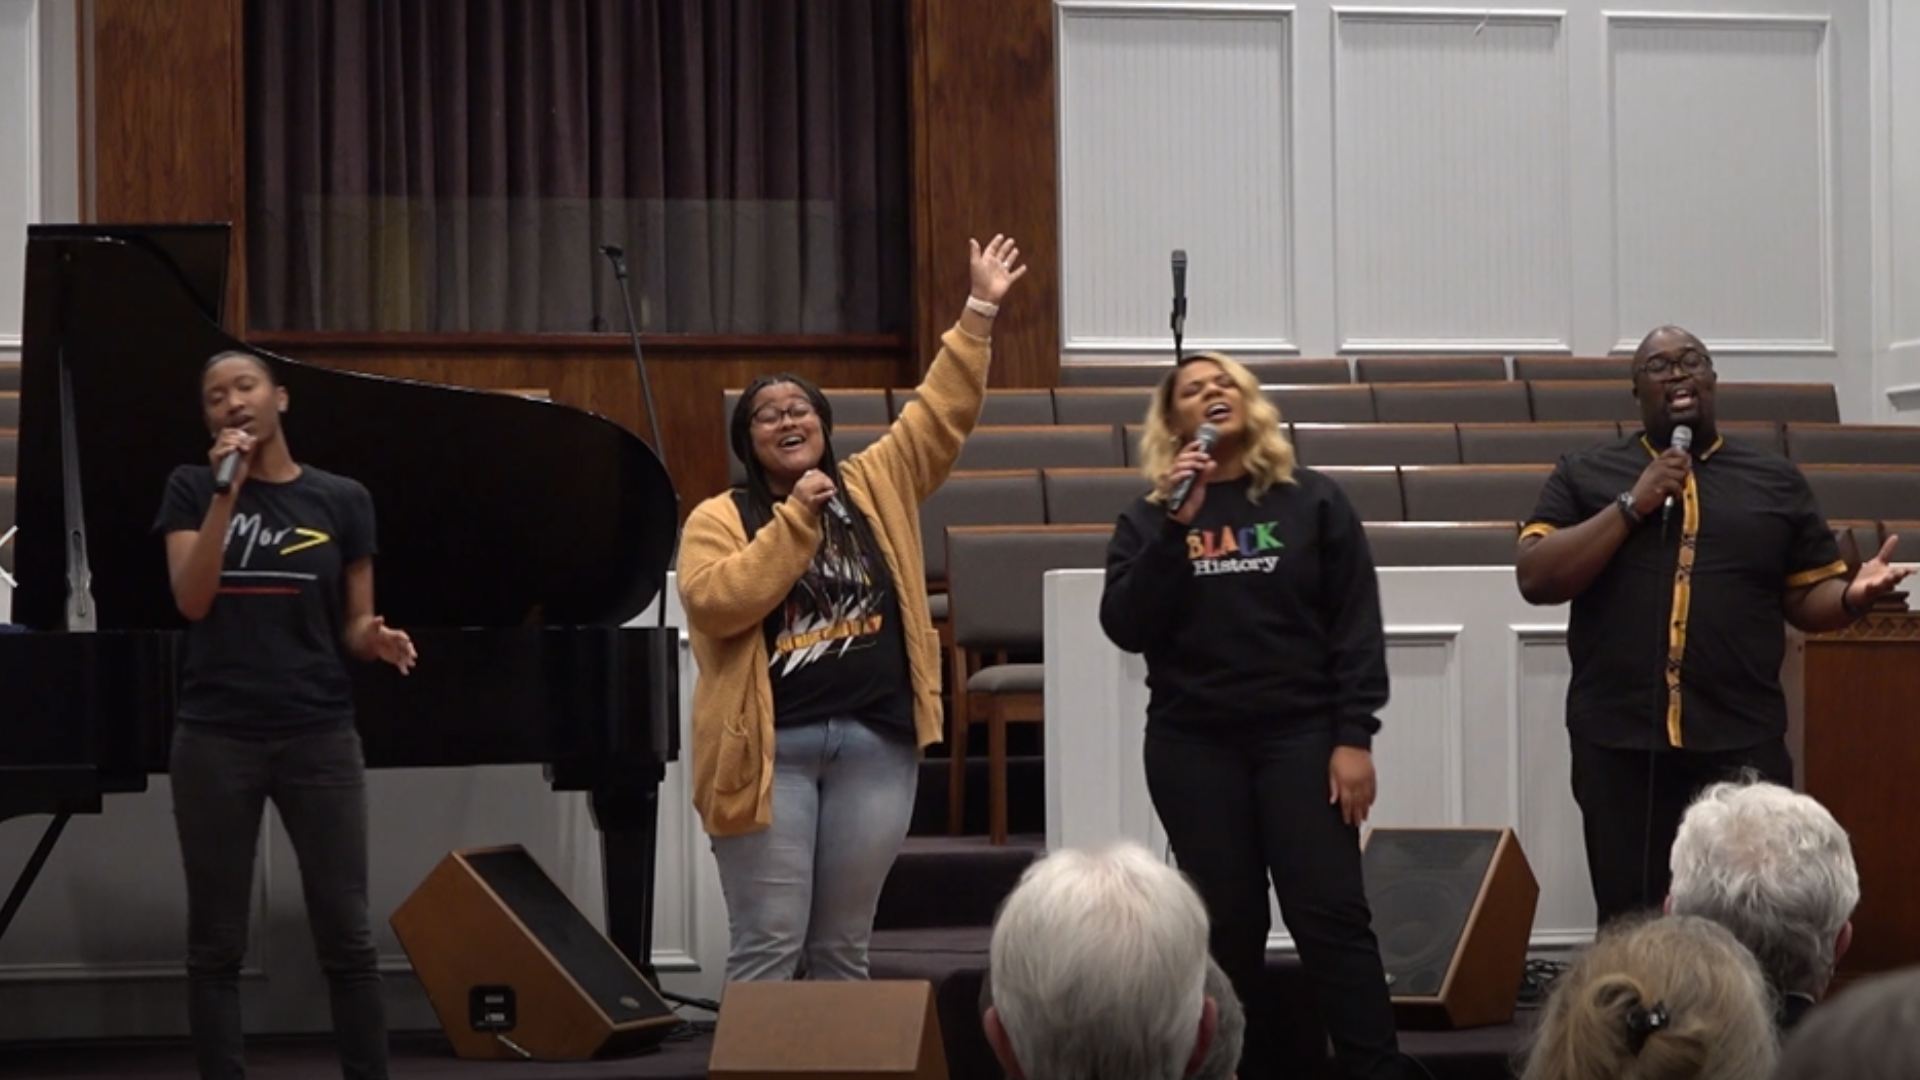 "When you sing these songs, you’re not singing lyrics, you're singing a story. A story that your ancestors were all a part of. That's what gospel is."